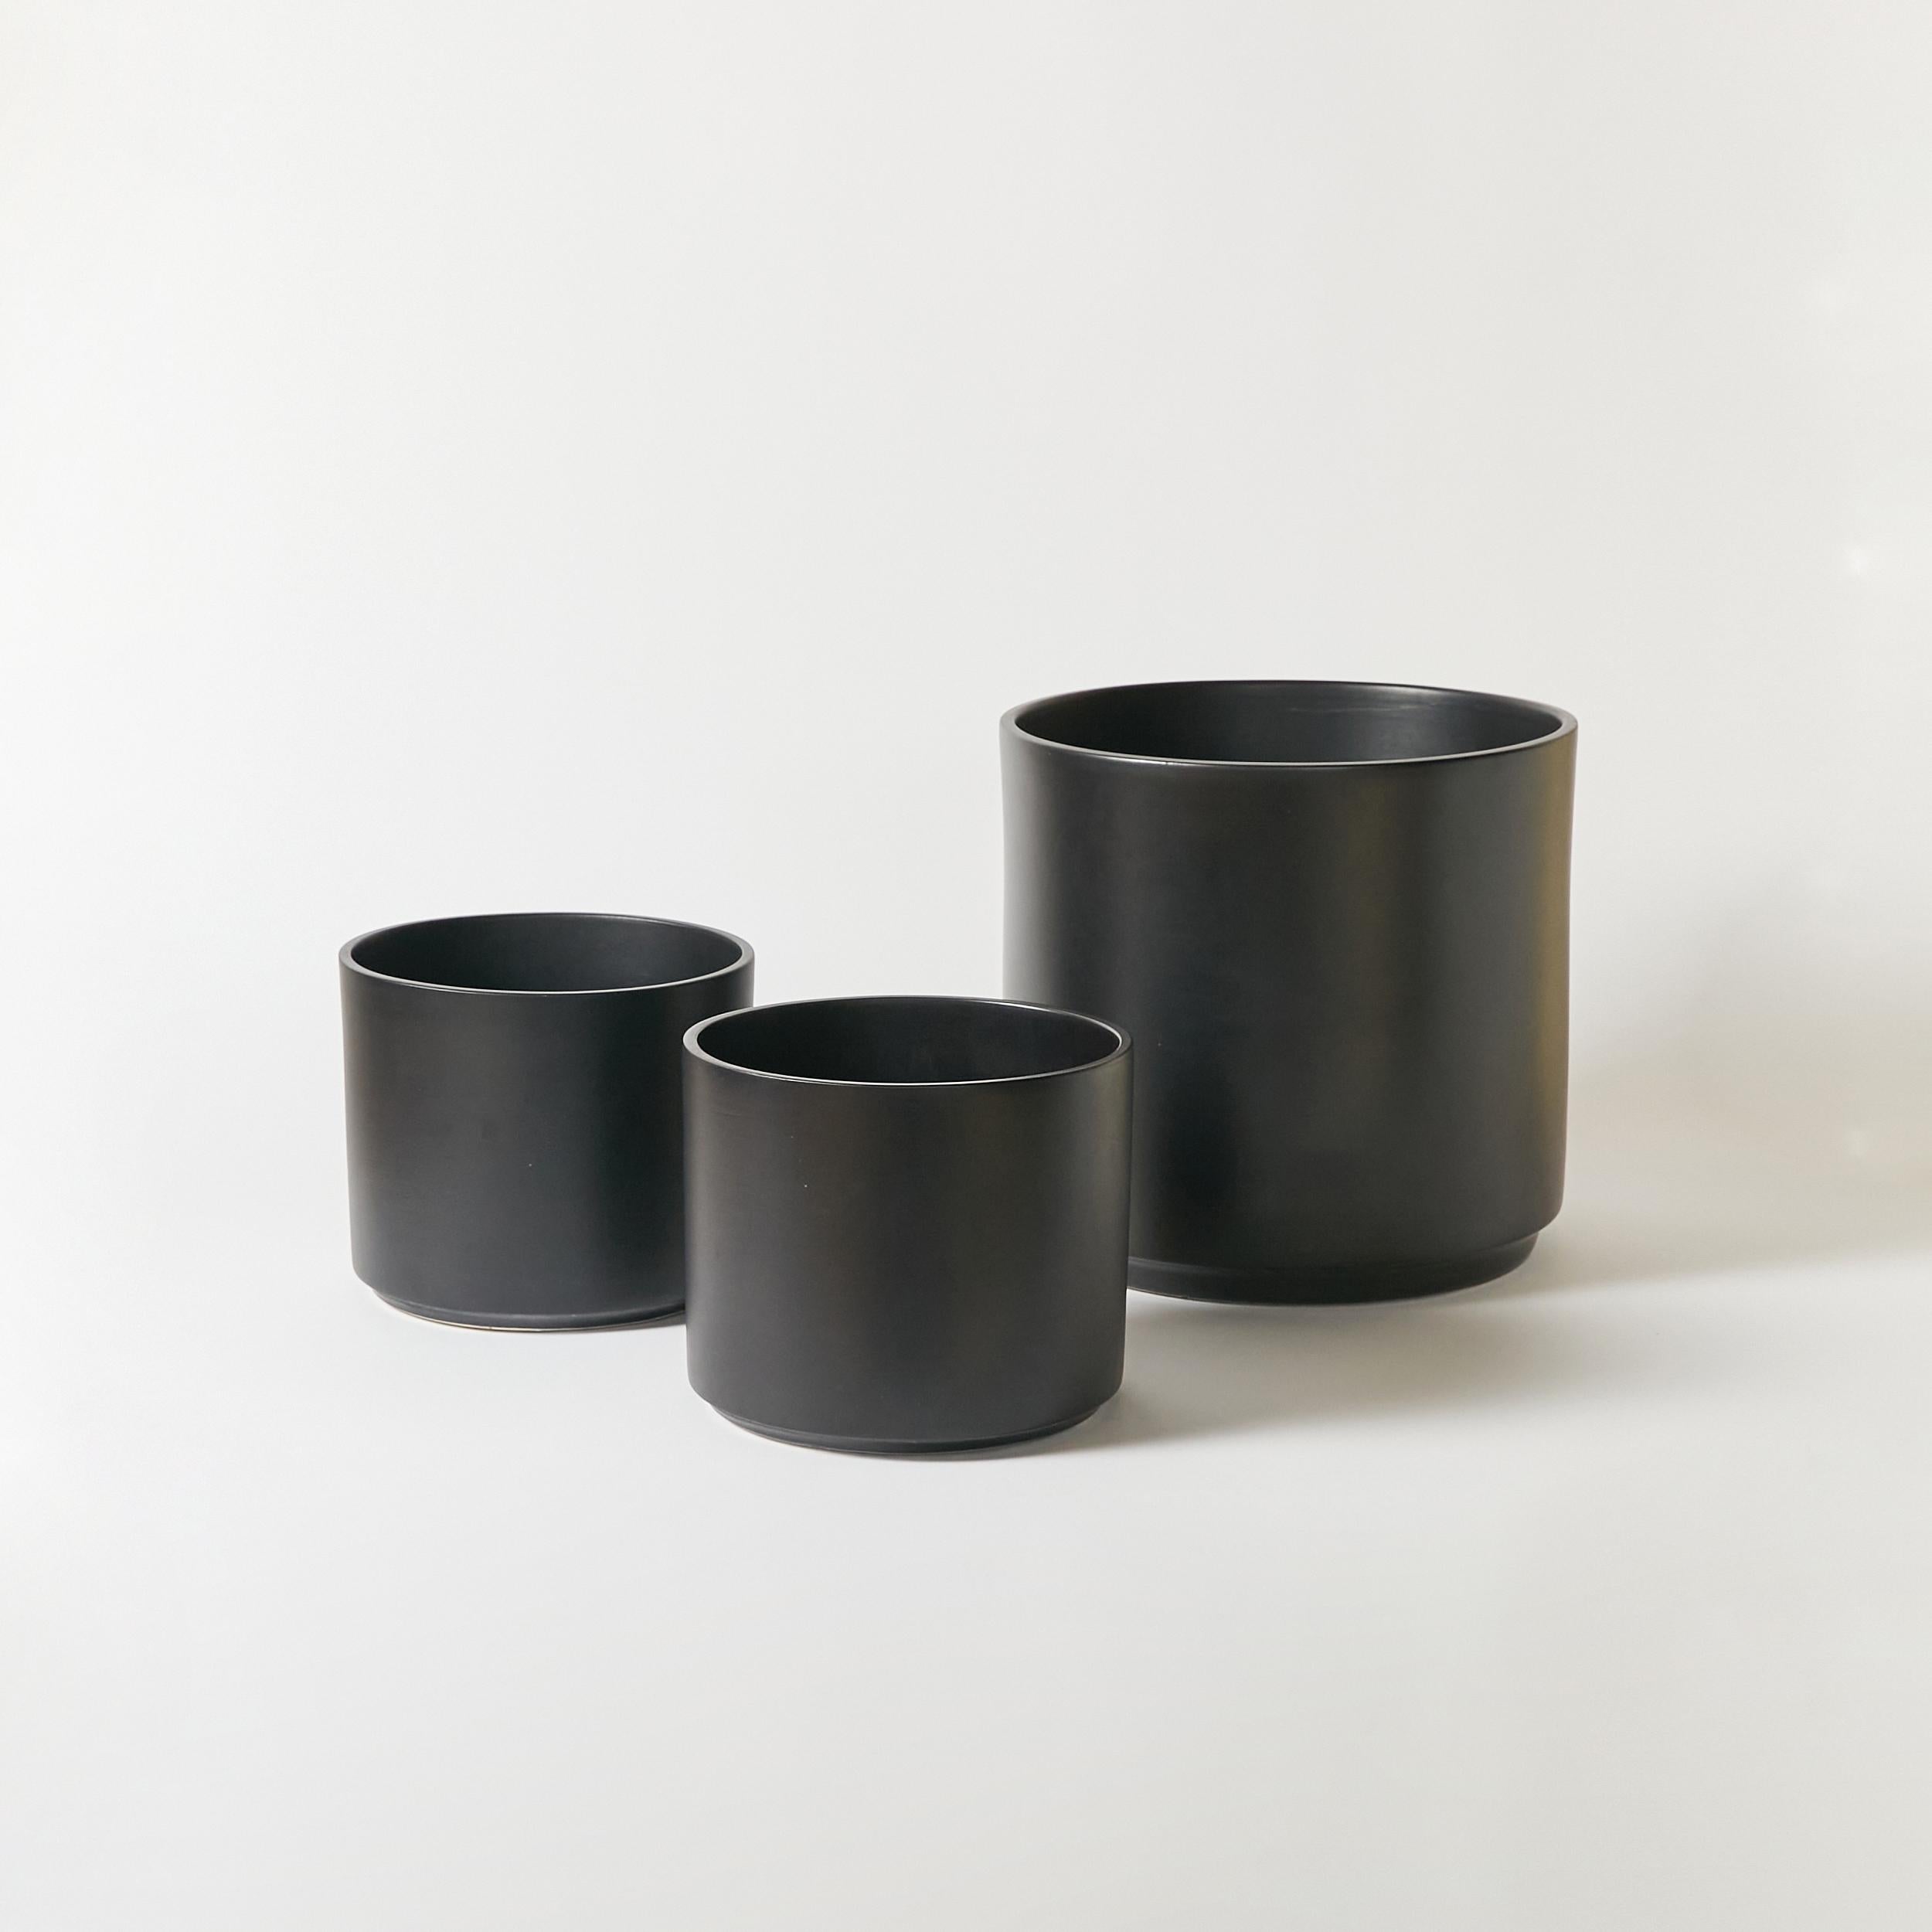 20th Century Pair of Gainey Planters in Satin Black Glaze, California Architectural Pottery For Sale